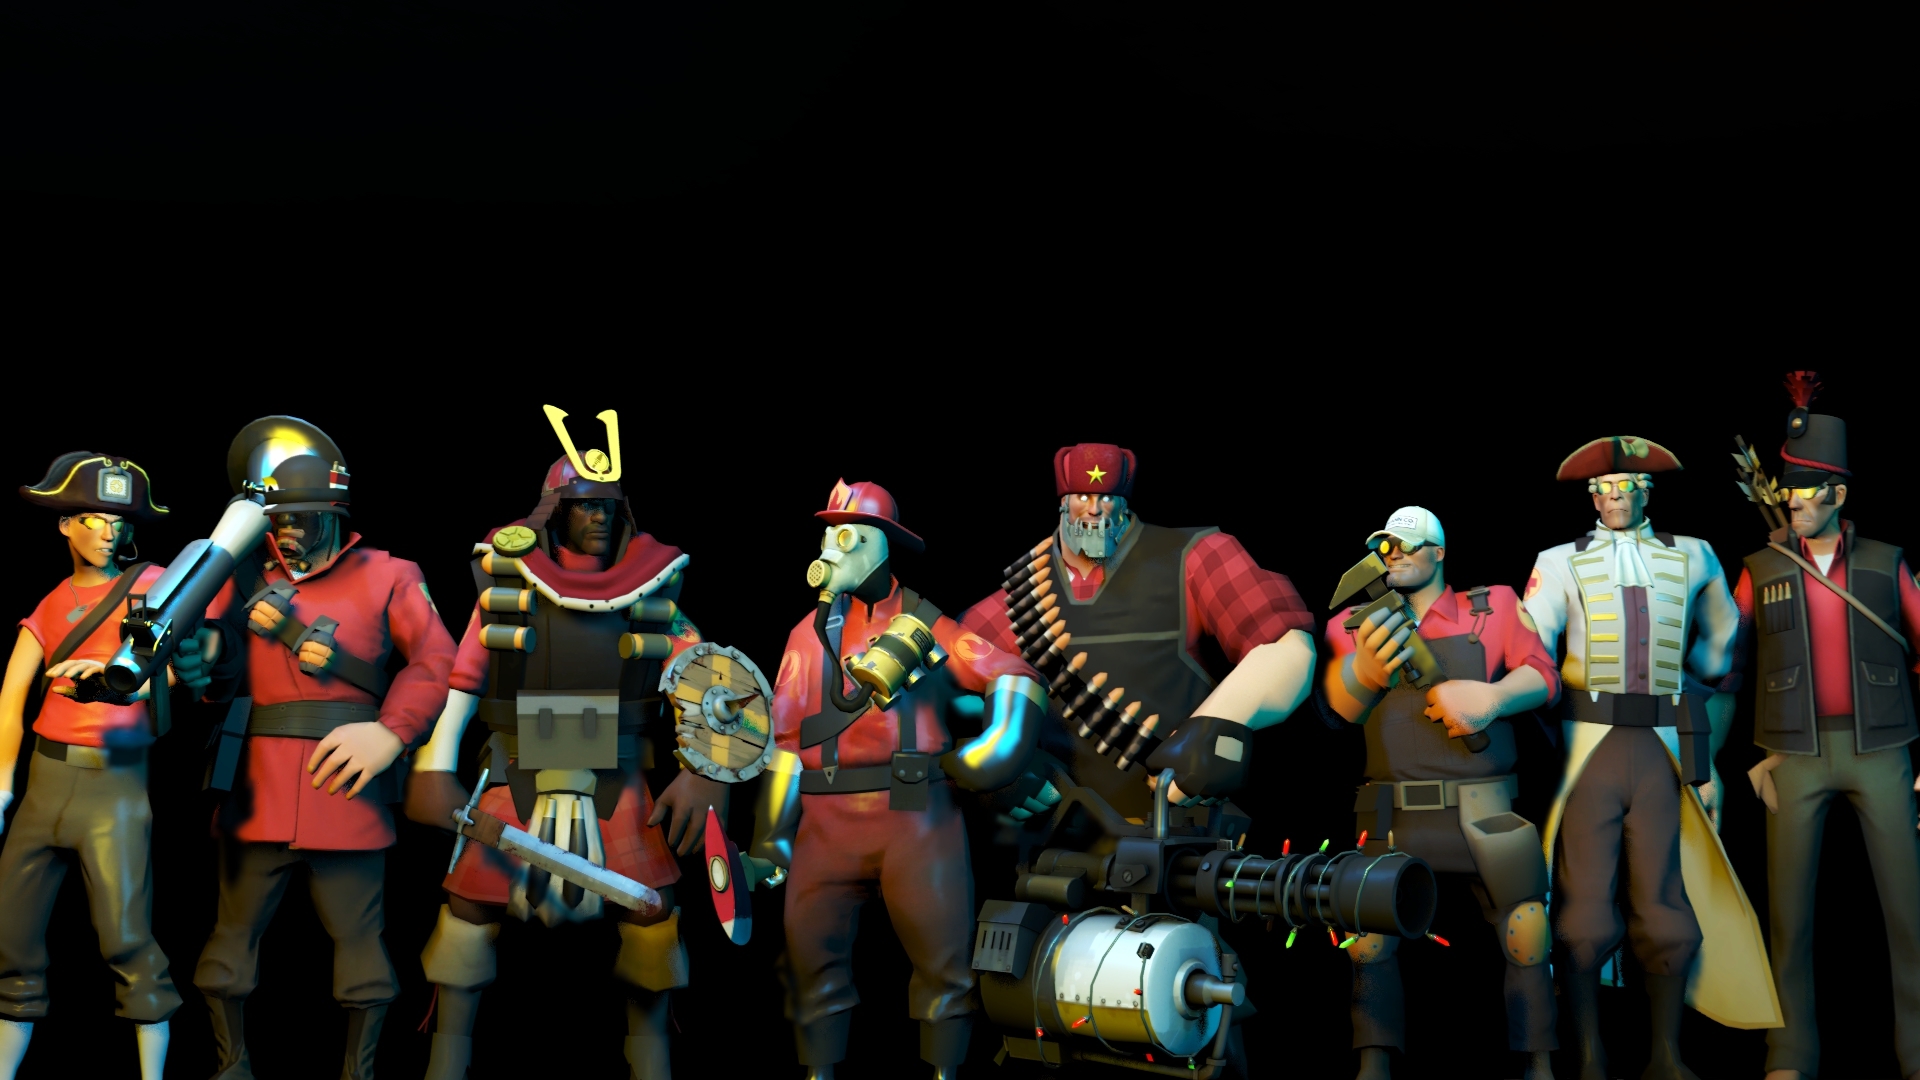 Loadout tf2. Tf2 Loadout.TF. Тф2 лодаут ТФ. Load tf2. Loadout 2.